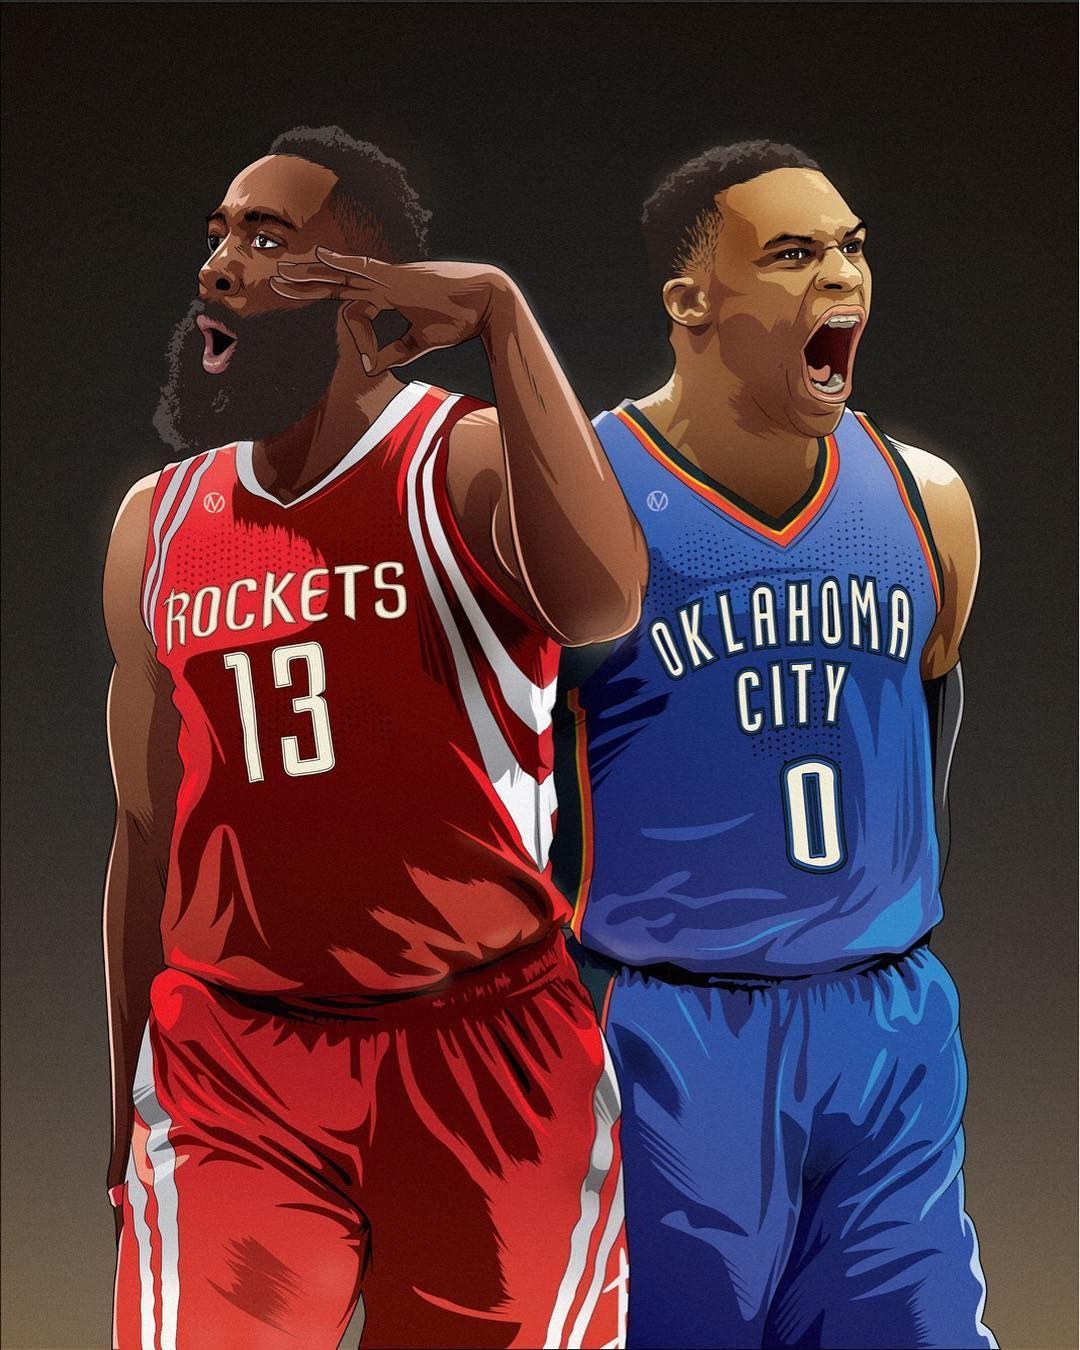 Russell Westbrook And James Harden Wallpapers - Wallpaper Cave